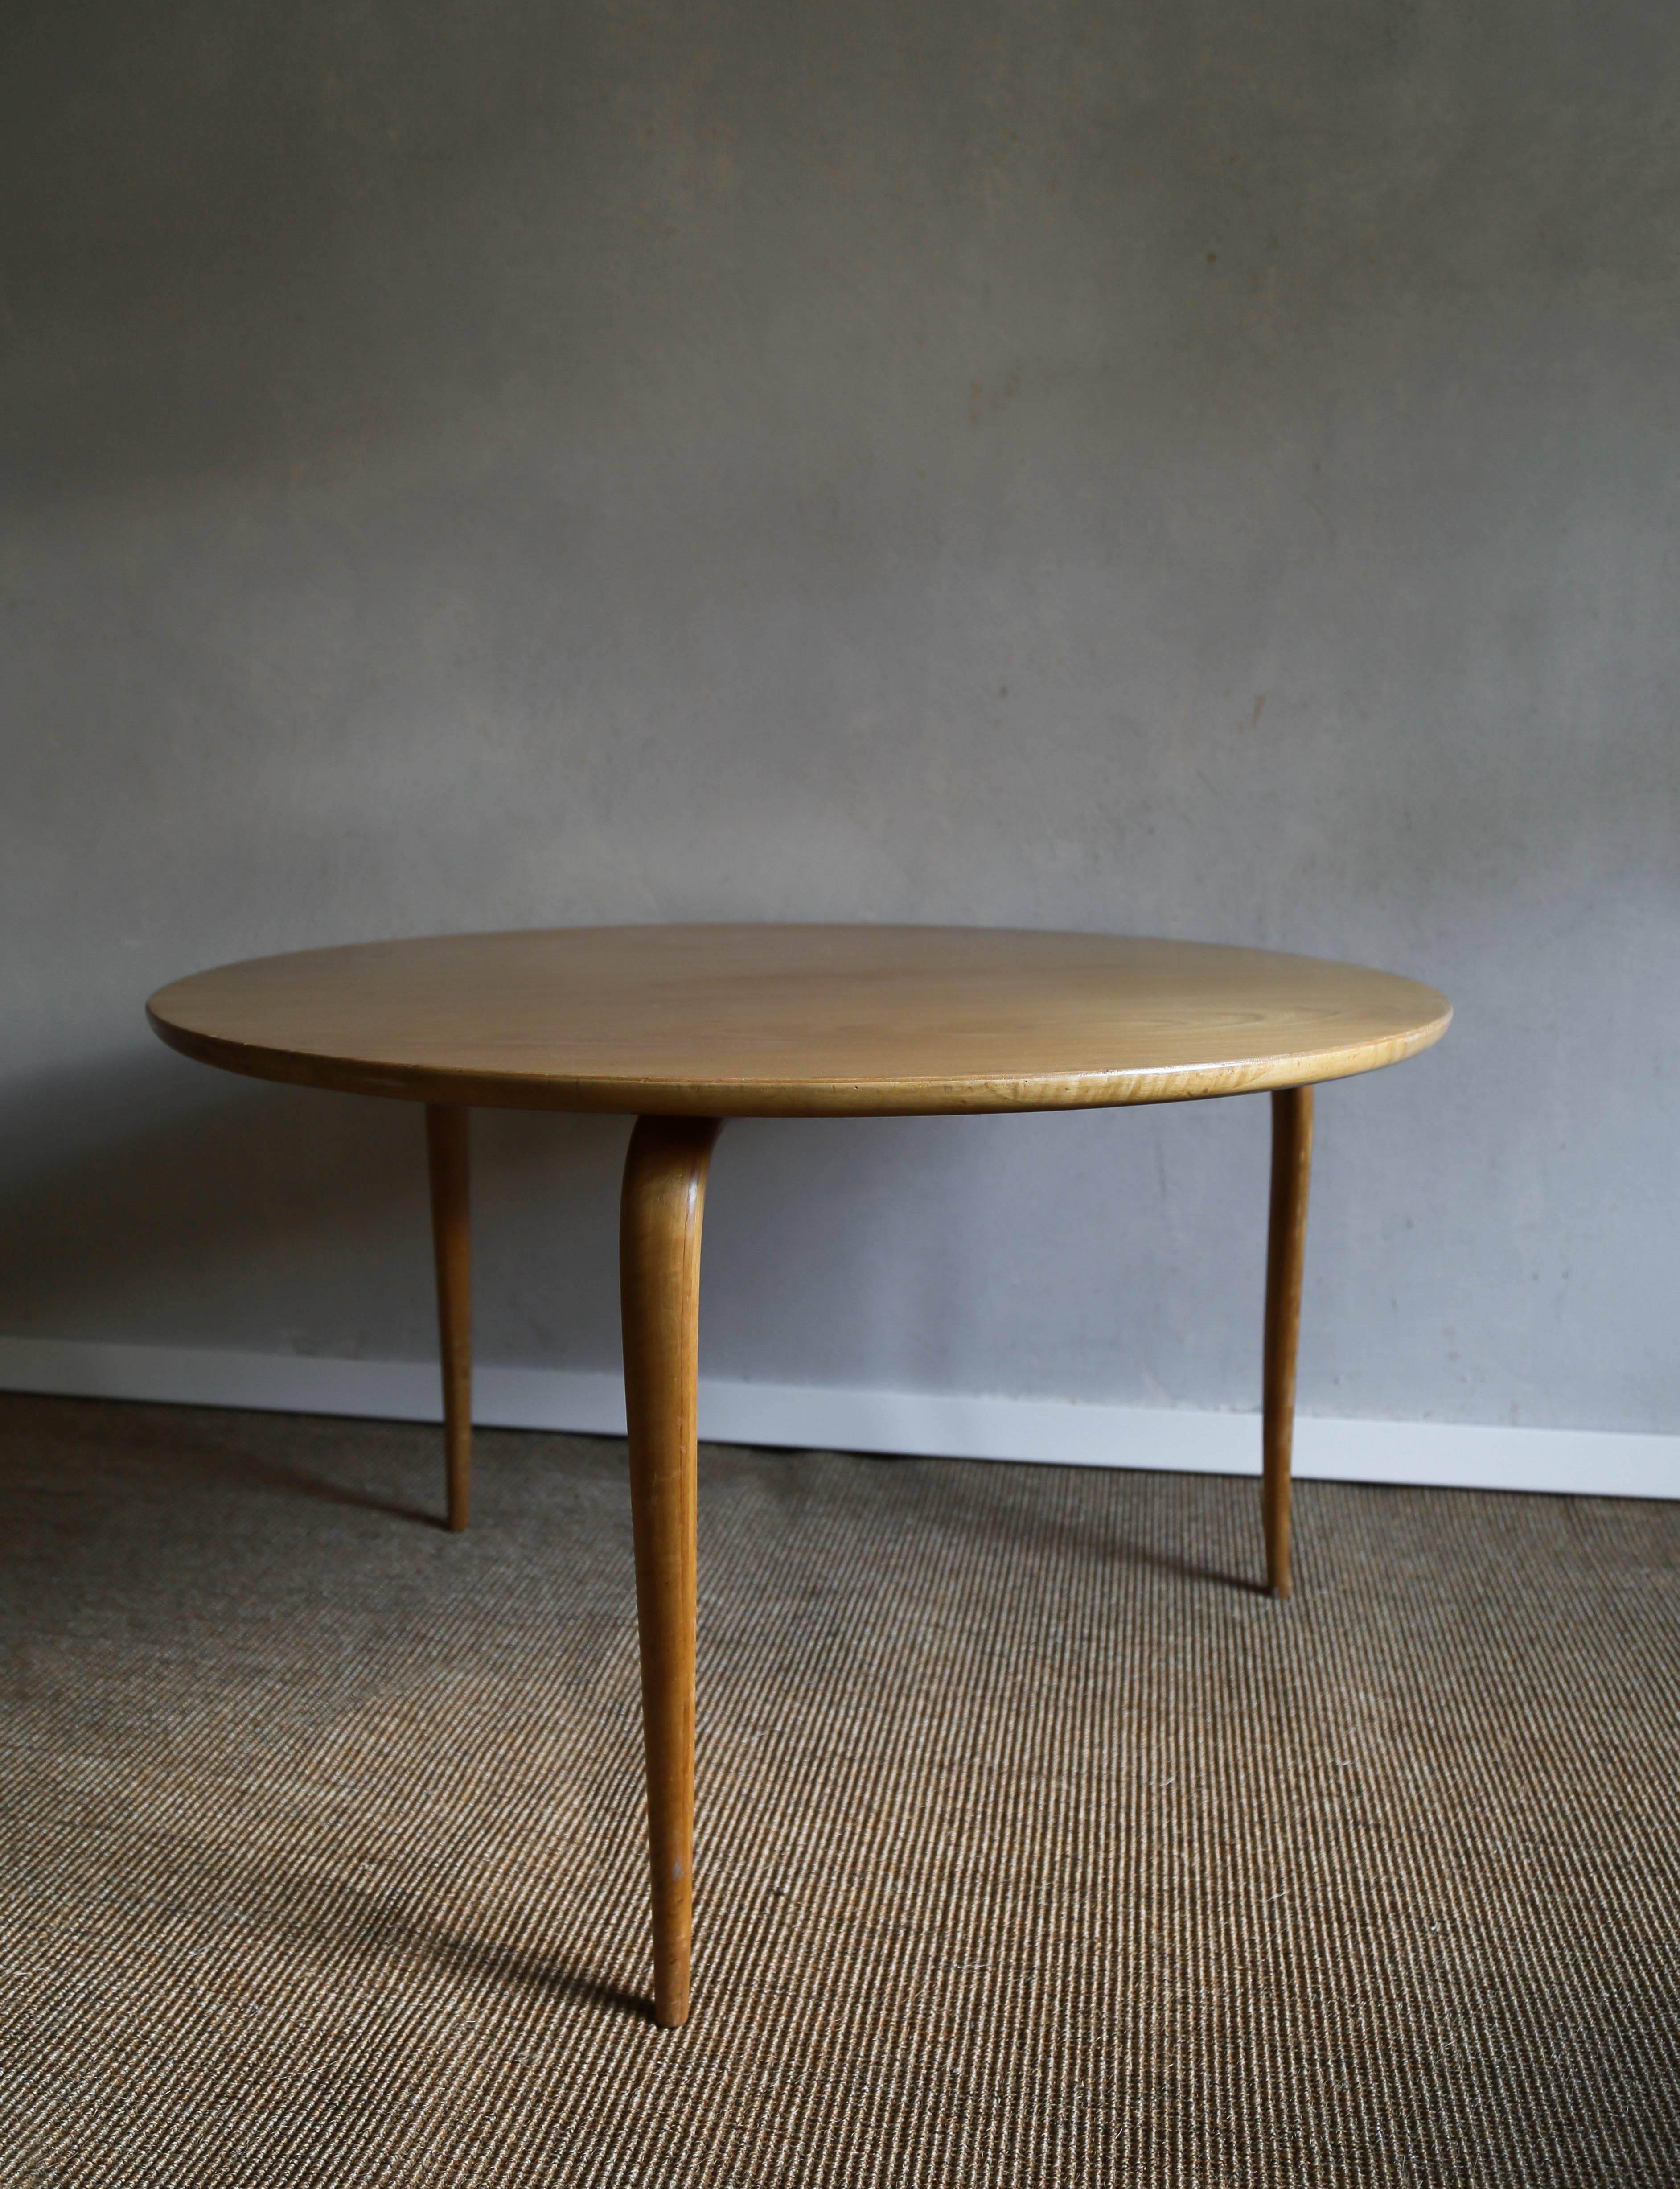 Early 'Annika' Table by Karl Mathsson

Sweden, 1930s

Teak, plywood, birch

Measures: 33.5 diameter x 20 height in
85 x 51 cm

Marked to underneath with early paper labels.